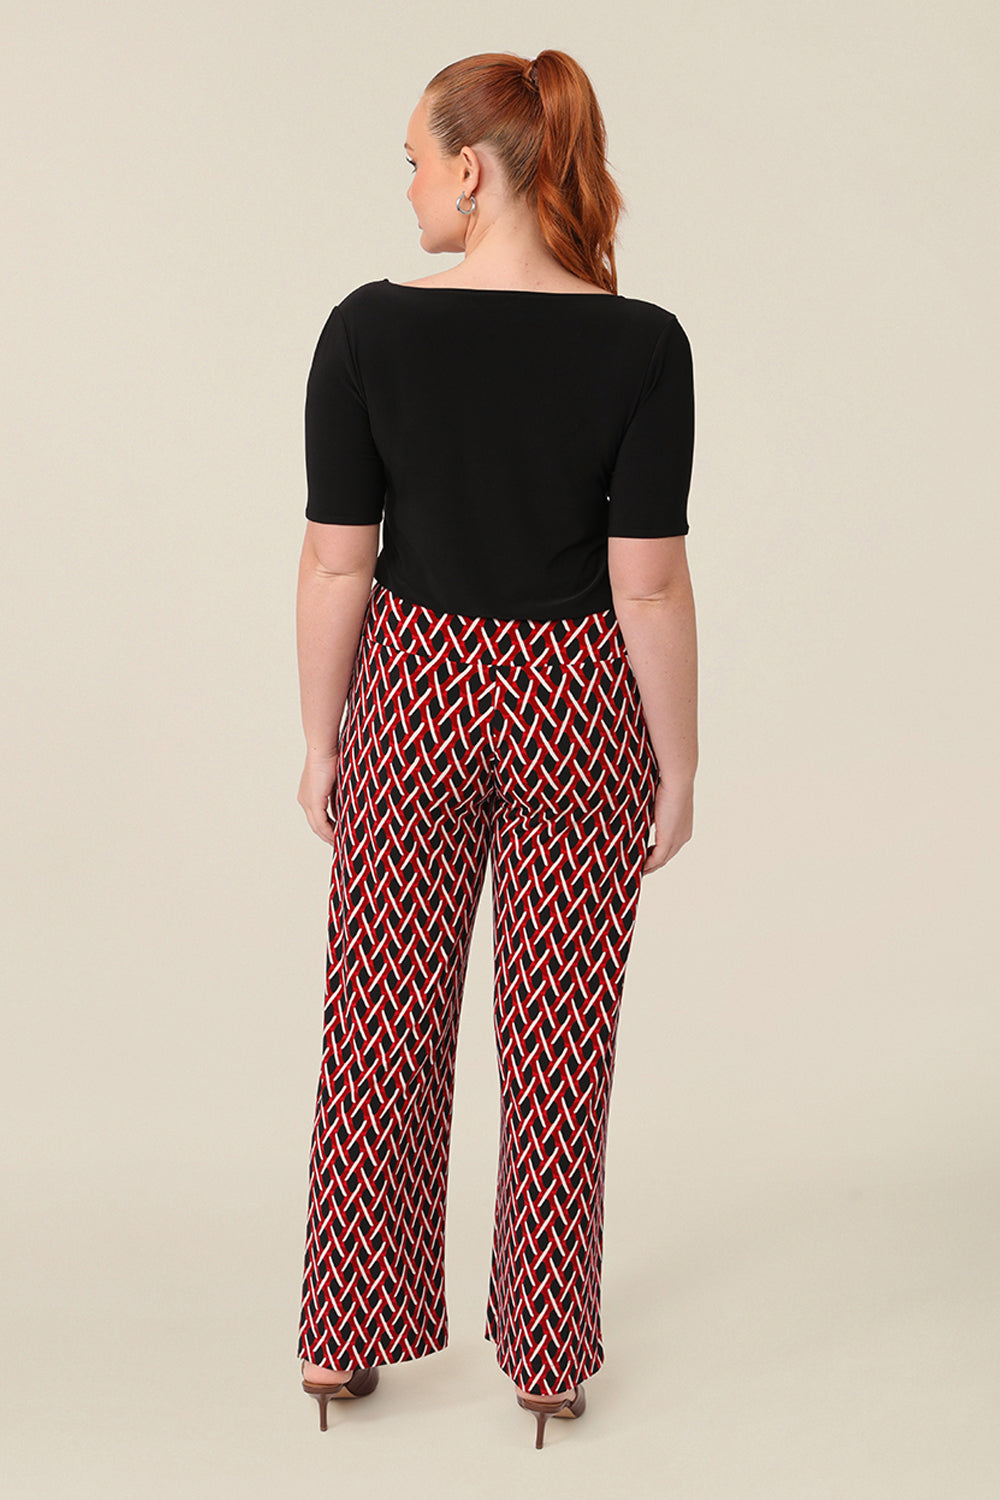 Back view of good work pants for curvy women. These geometric print trousers are straight cut, wide leg pants with a wide, pull-on waistband. Styled for work wear, these office pants are worn with a black short sleeve top. Made in Australia, shop online now in sizes 8 to 24.